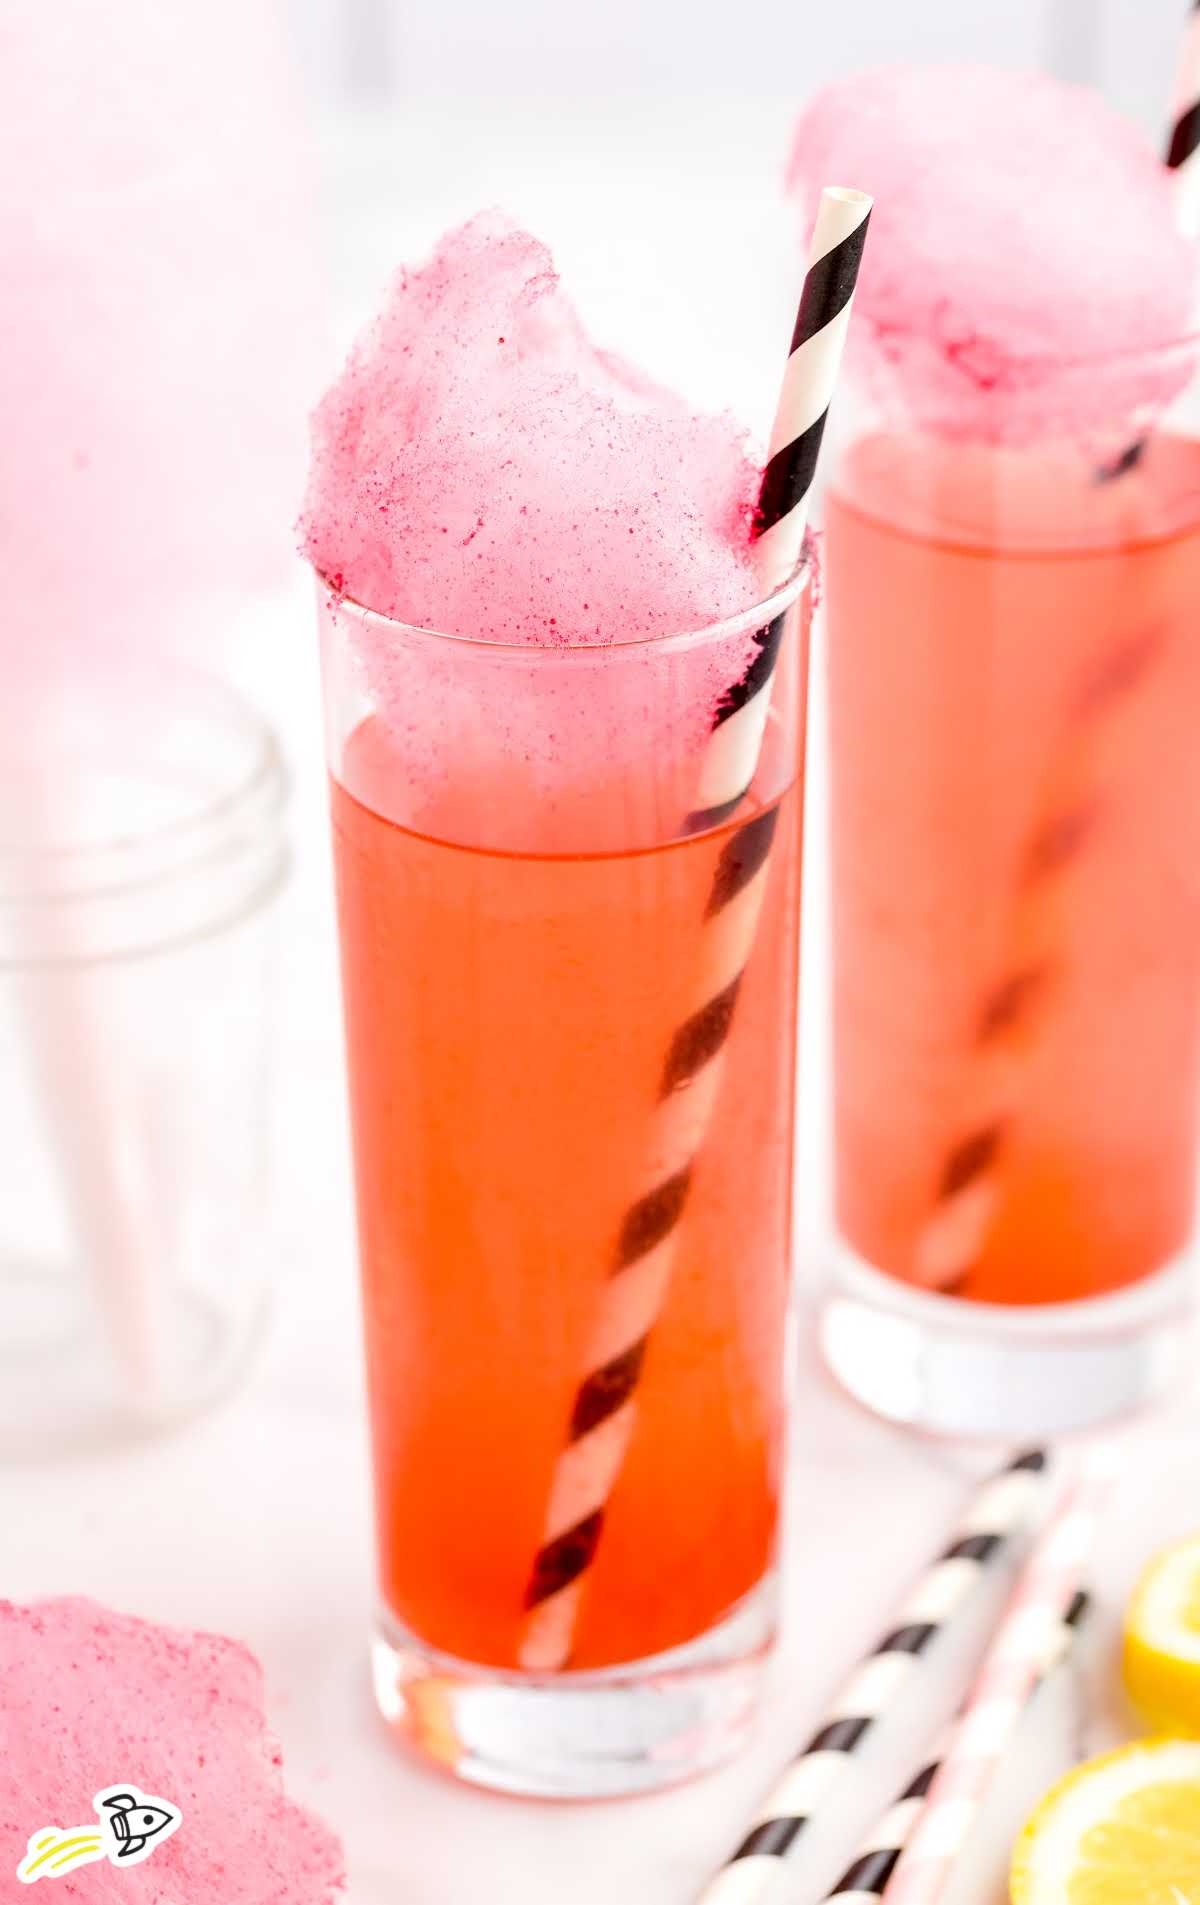 a close up shot of Cotton Candy Cocktails topped with cotton candy